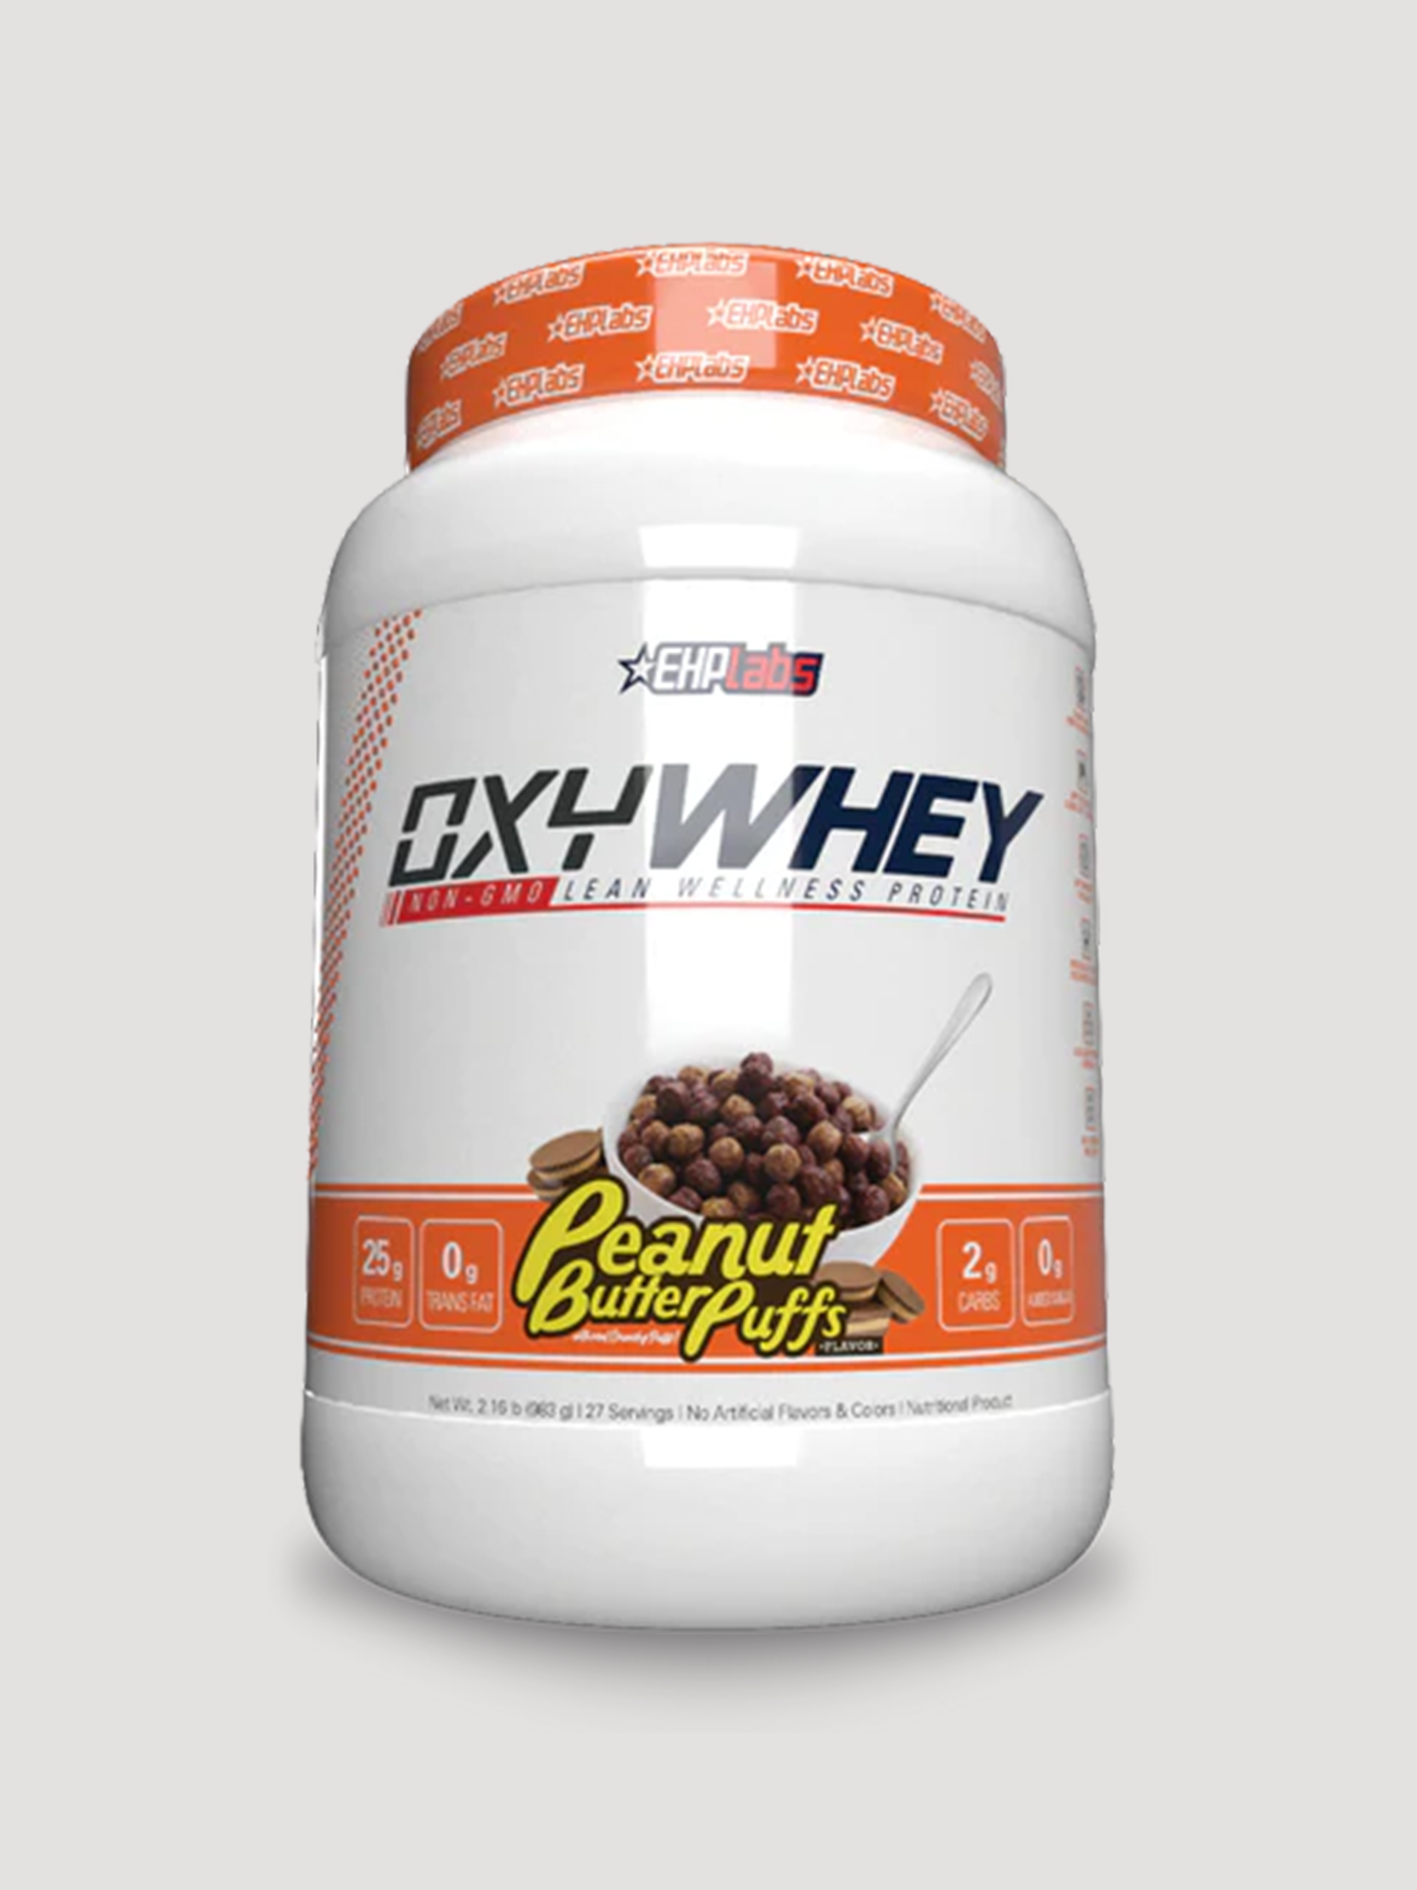 OxyWhey Lean Wellness Protein by EHP Labs-Protein-EHP Labs-Peanut Butter Puffs-Club Bunker